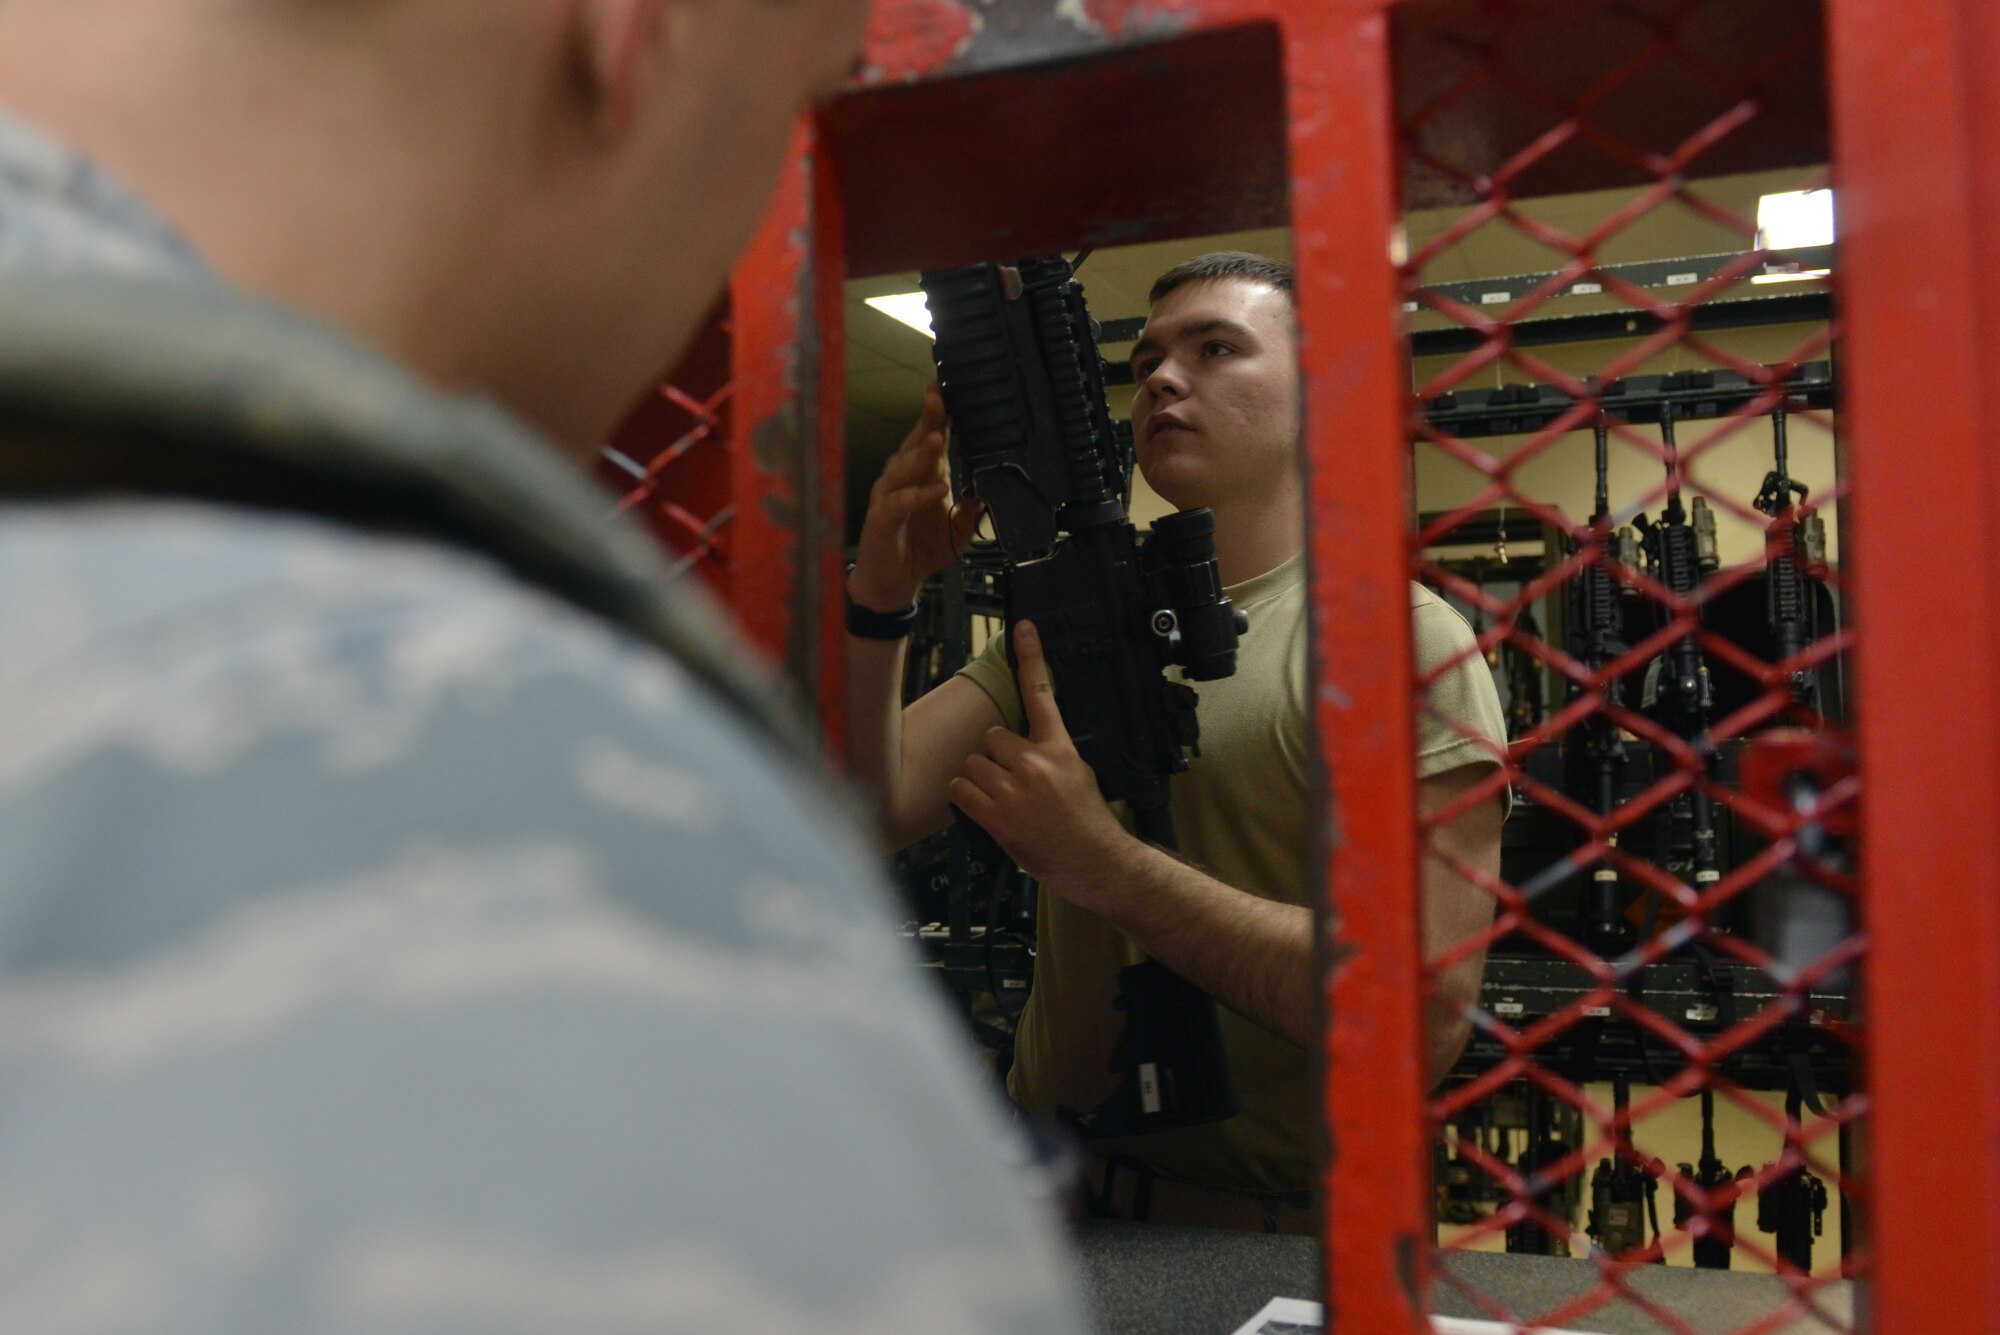 A U.S. Airman assigned to the 39th Security Forces Squadron prepares an M4 carbine for issue July 20, 2016, at Incirlik Air Base, Turkey. Security Forces Airmen report to the armory prior to duty for weapon and equipment issue. (U.S. Air Force photo by Senior Airman John Nieves Camacho)